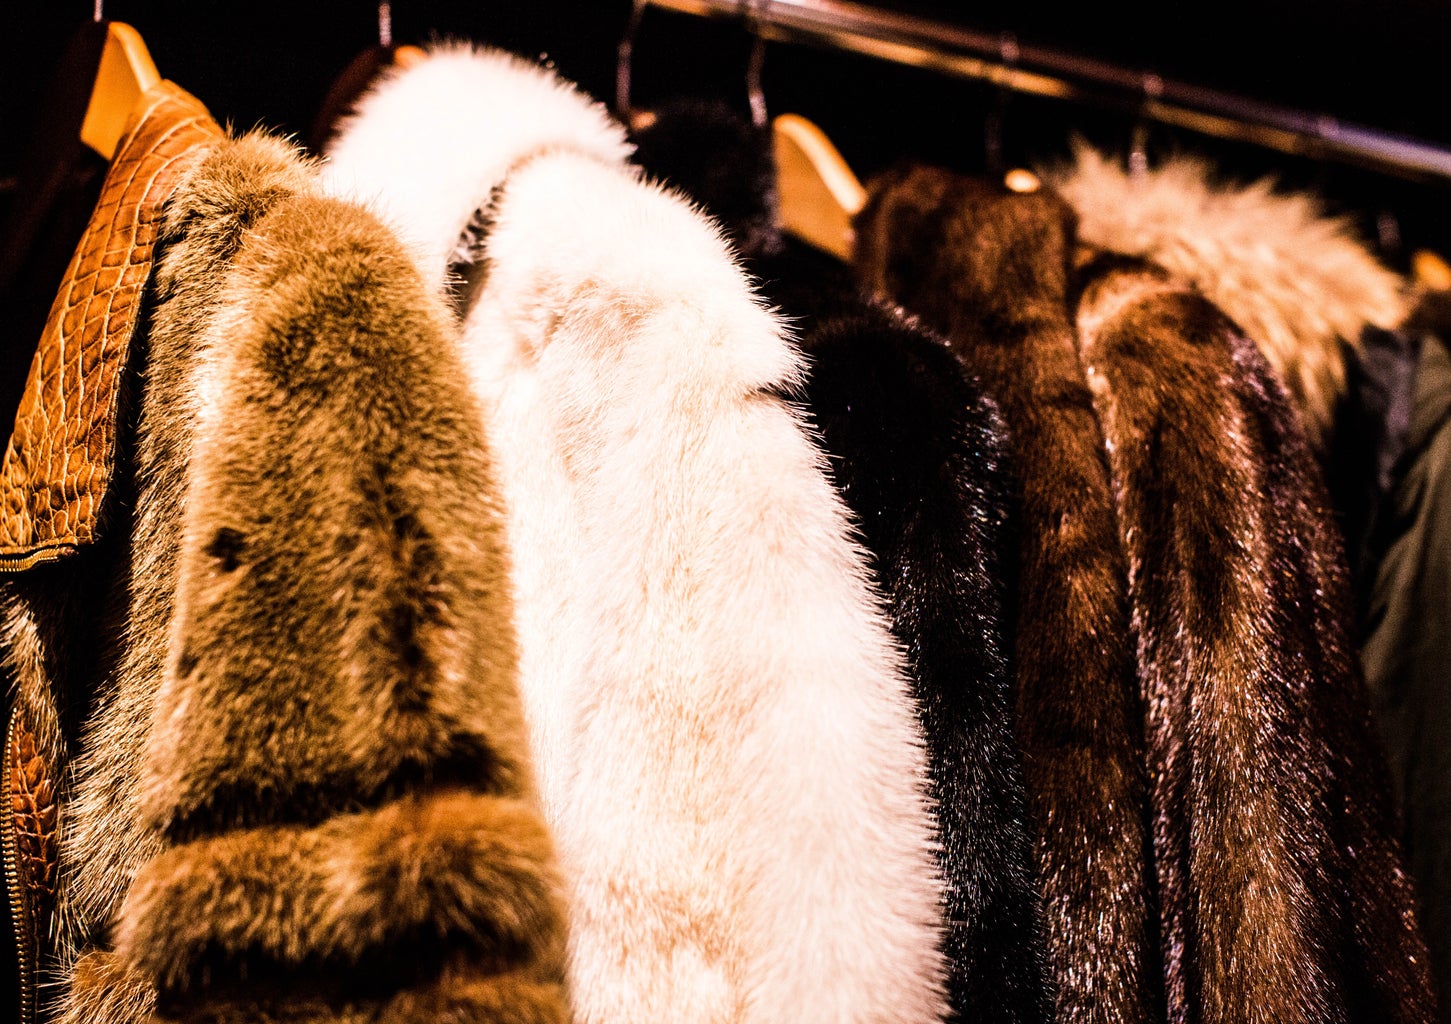 Fur coats hanging up on a clothes rack.